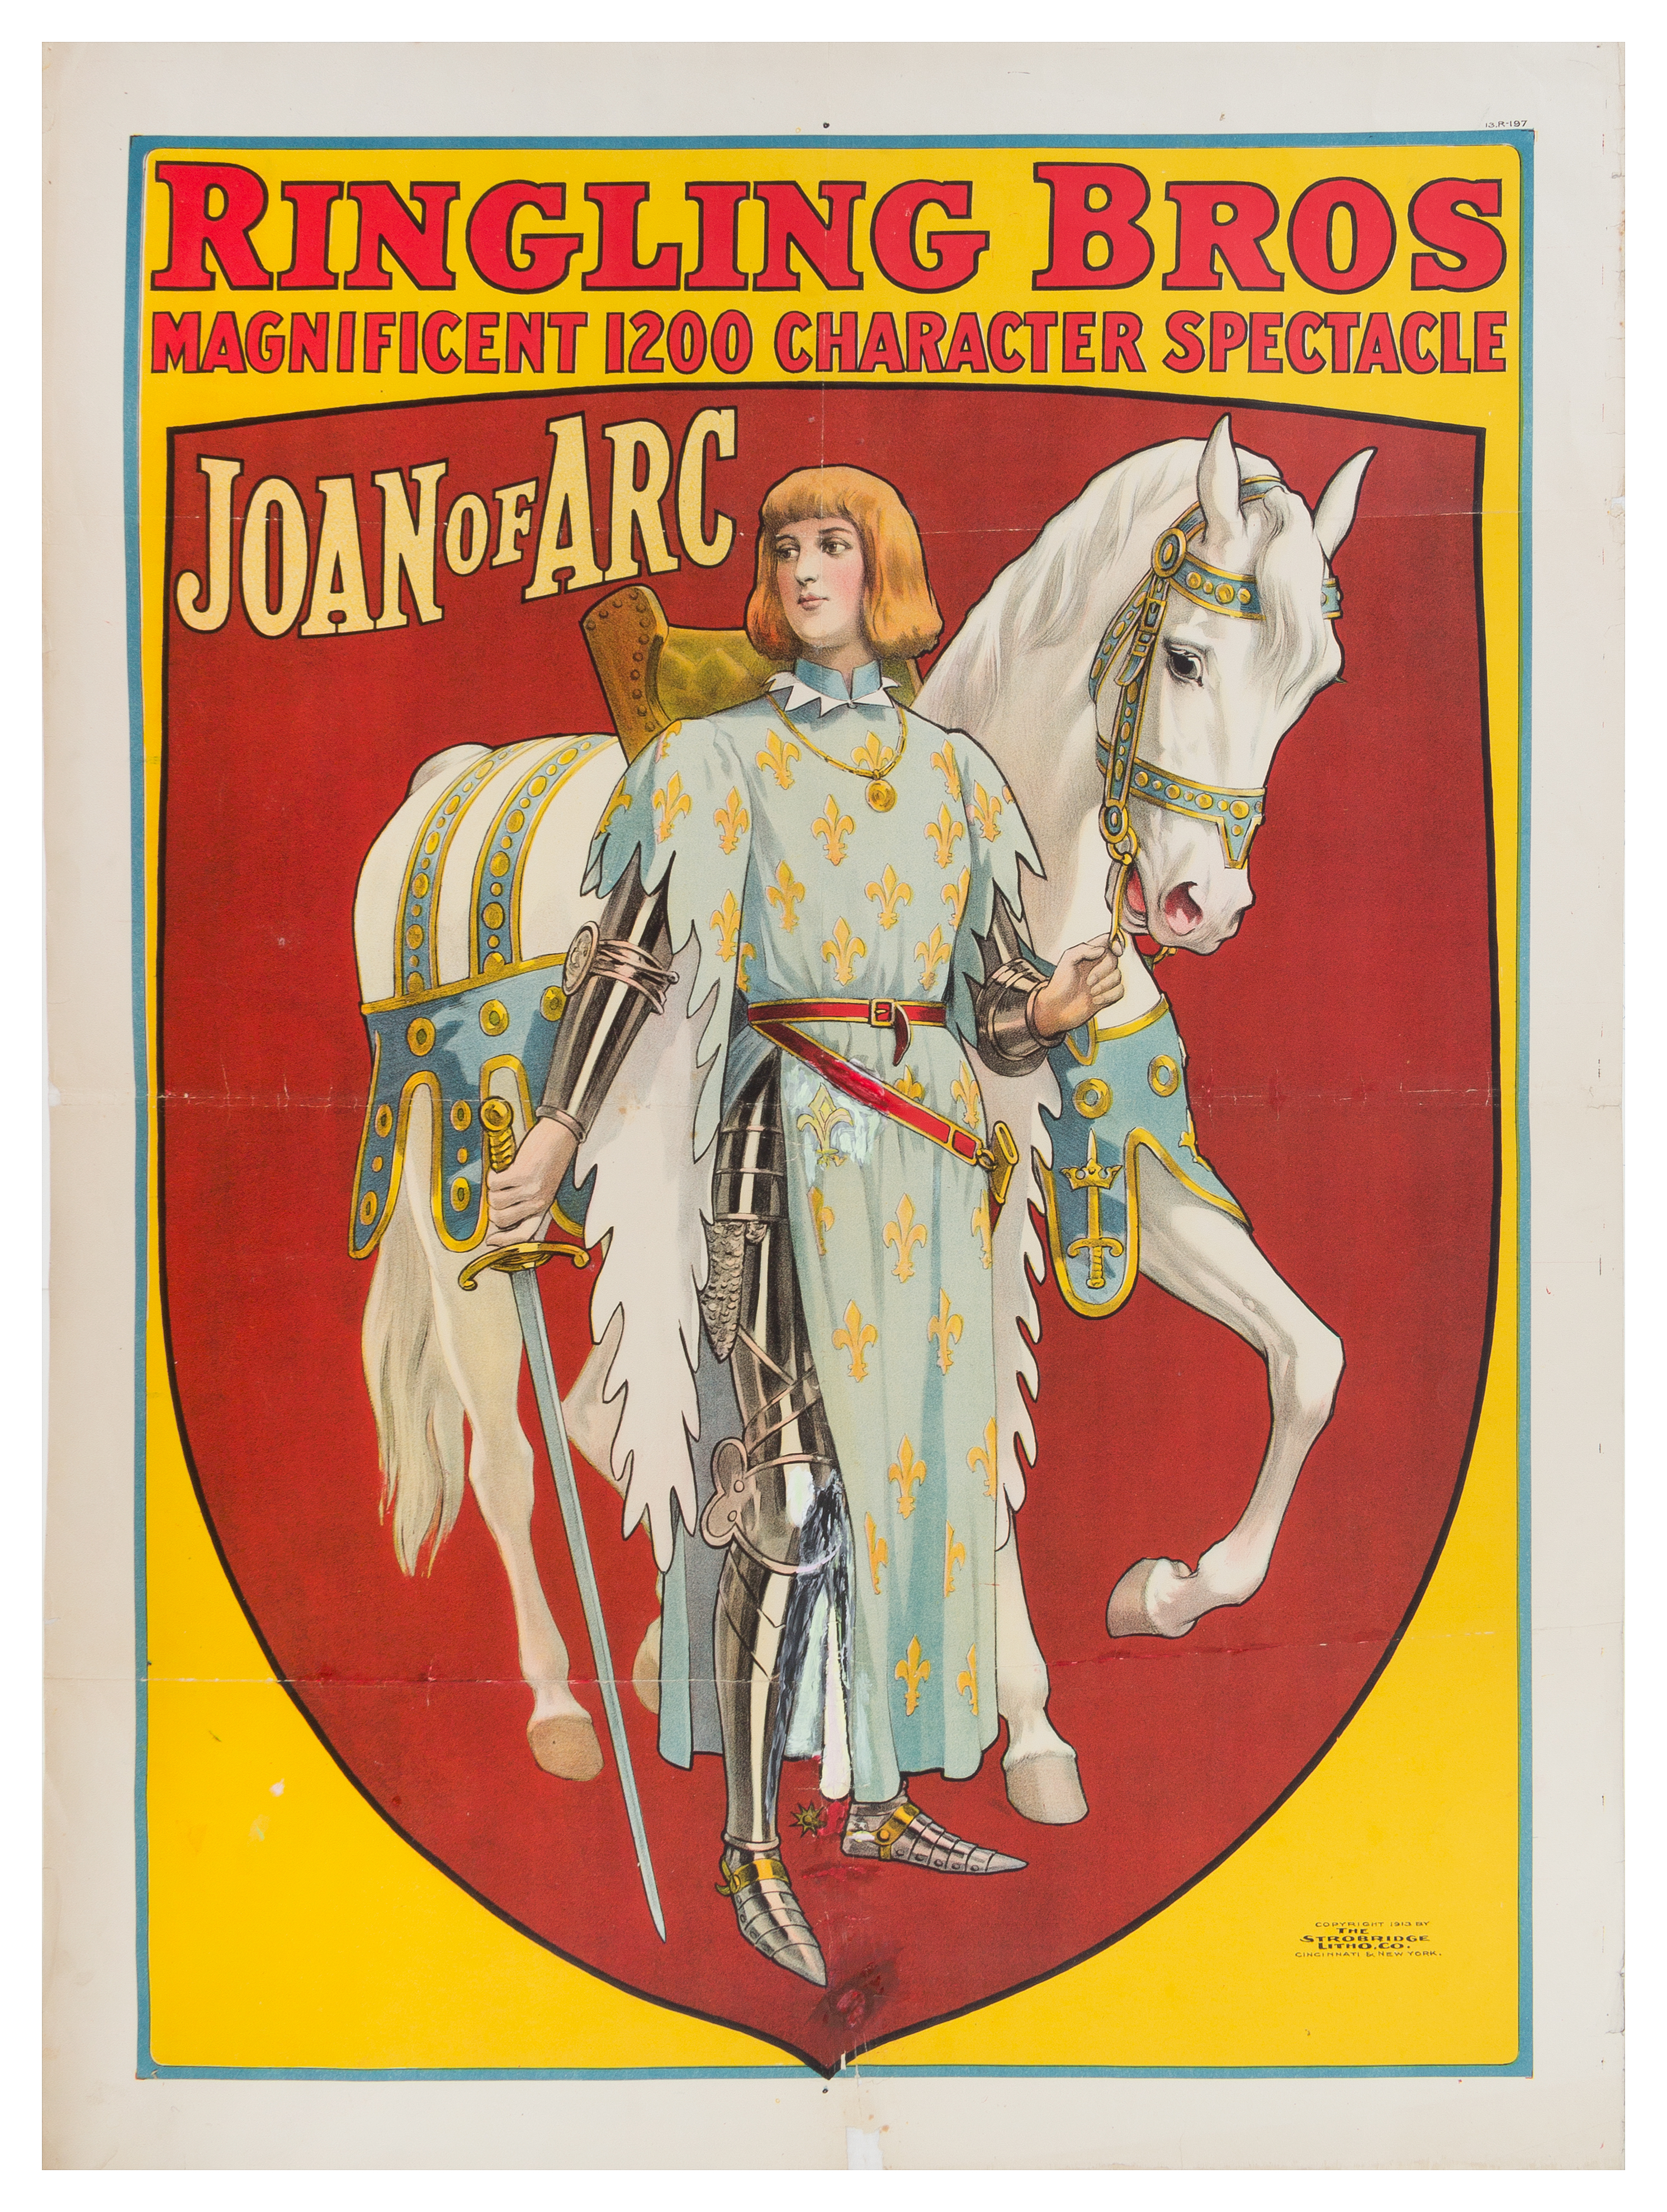 A 1913 poster by Ringling Brothers, featuring Joan of Arc and promising a 'Magnificent 1200 Character Spectacle.' It's from the Richard Bennett Collection of Circus Memorabilia. 